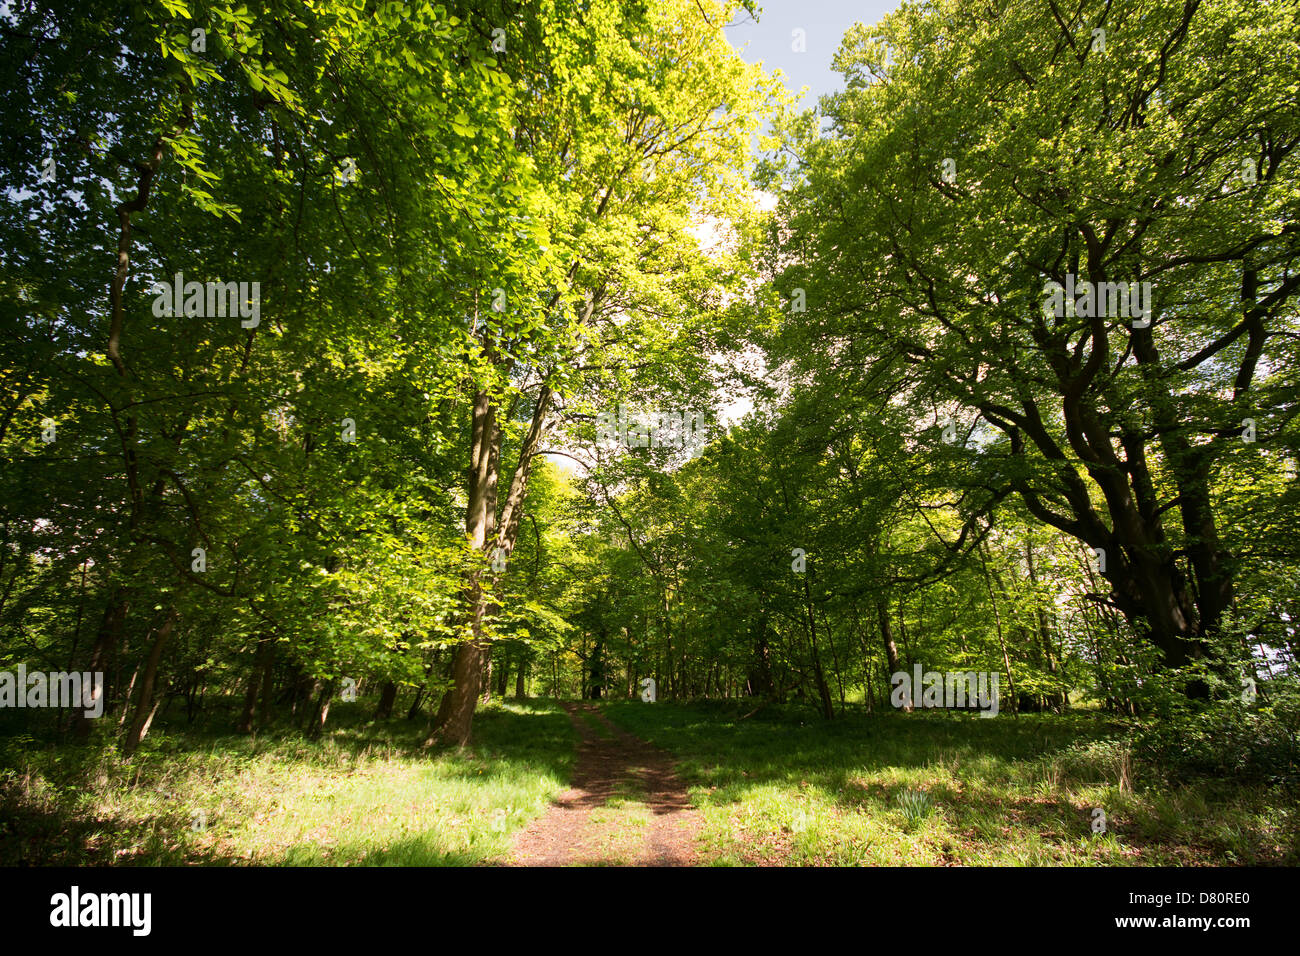 OXFORDSHIRE, UK. A shady tree-lined track in Wytham Woods near Oxford. 2013. Stock Photo